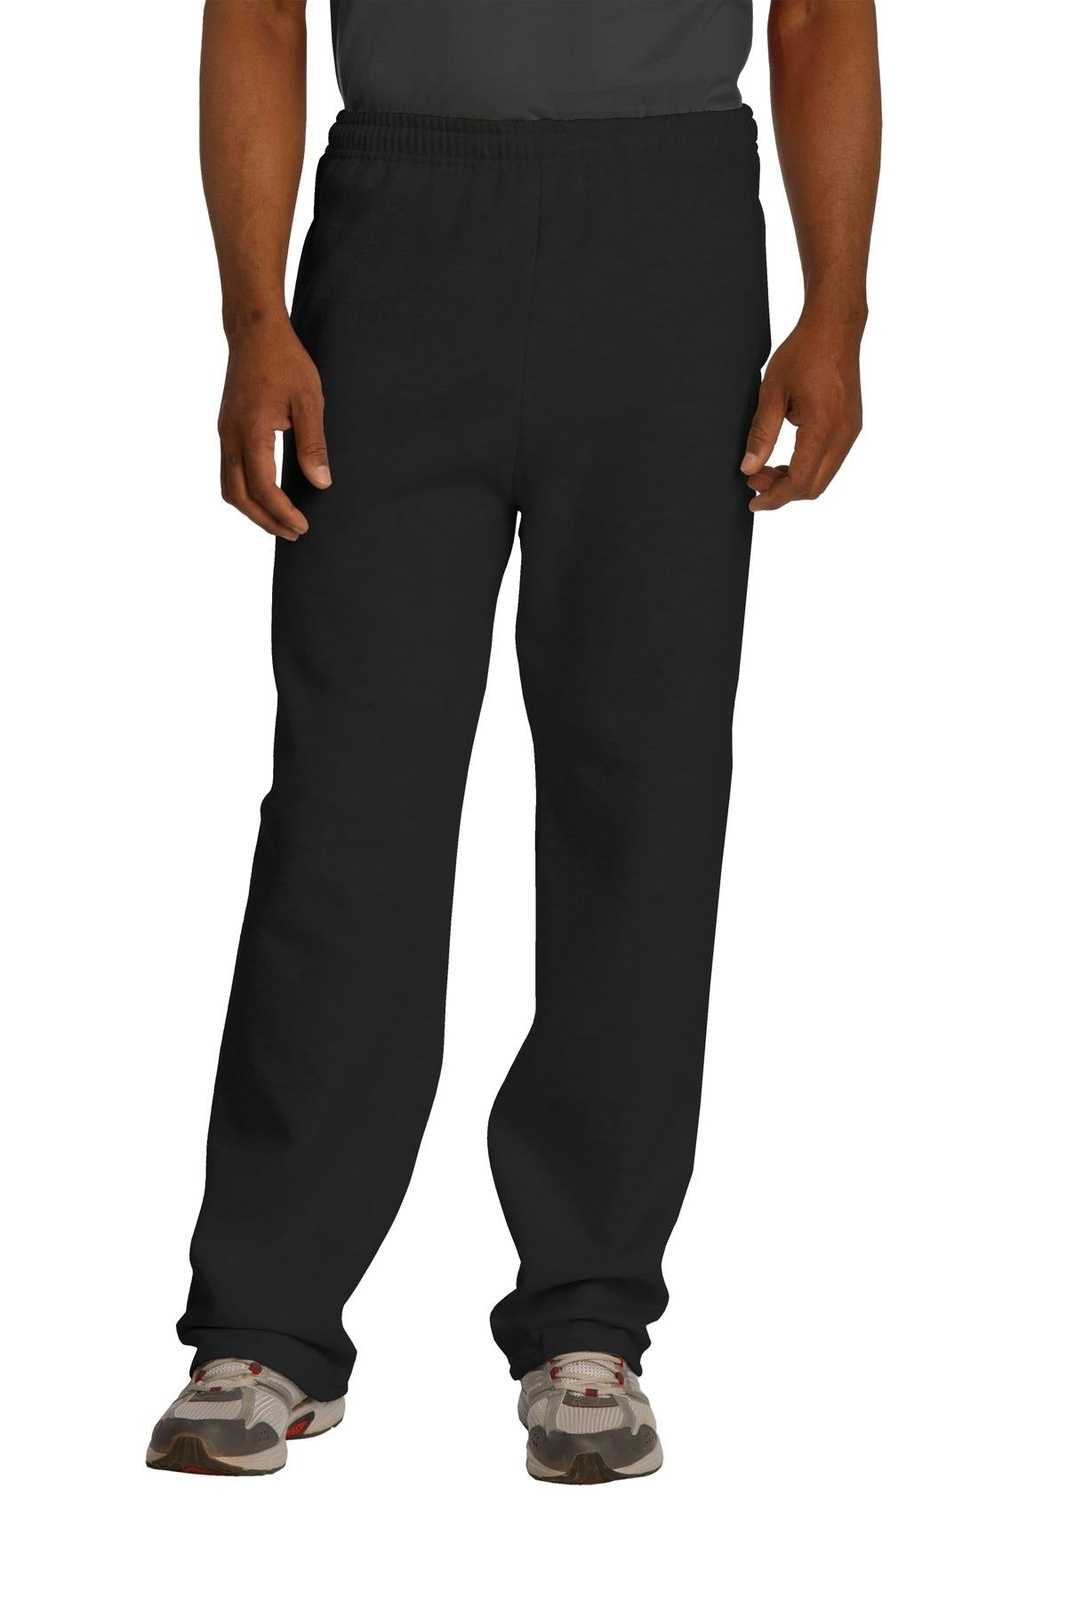 Jerzees 974MP Nublend Open Bottom Pant with Pockets - Black - HIT a Double